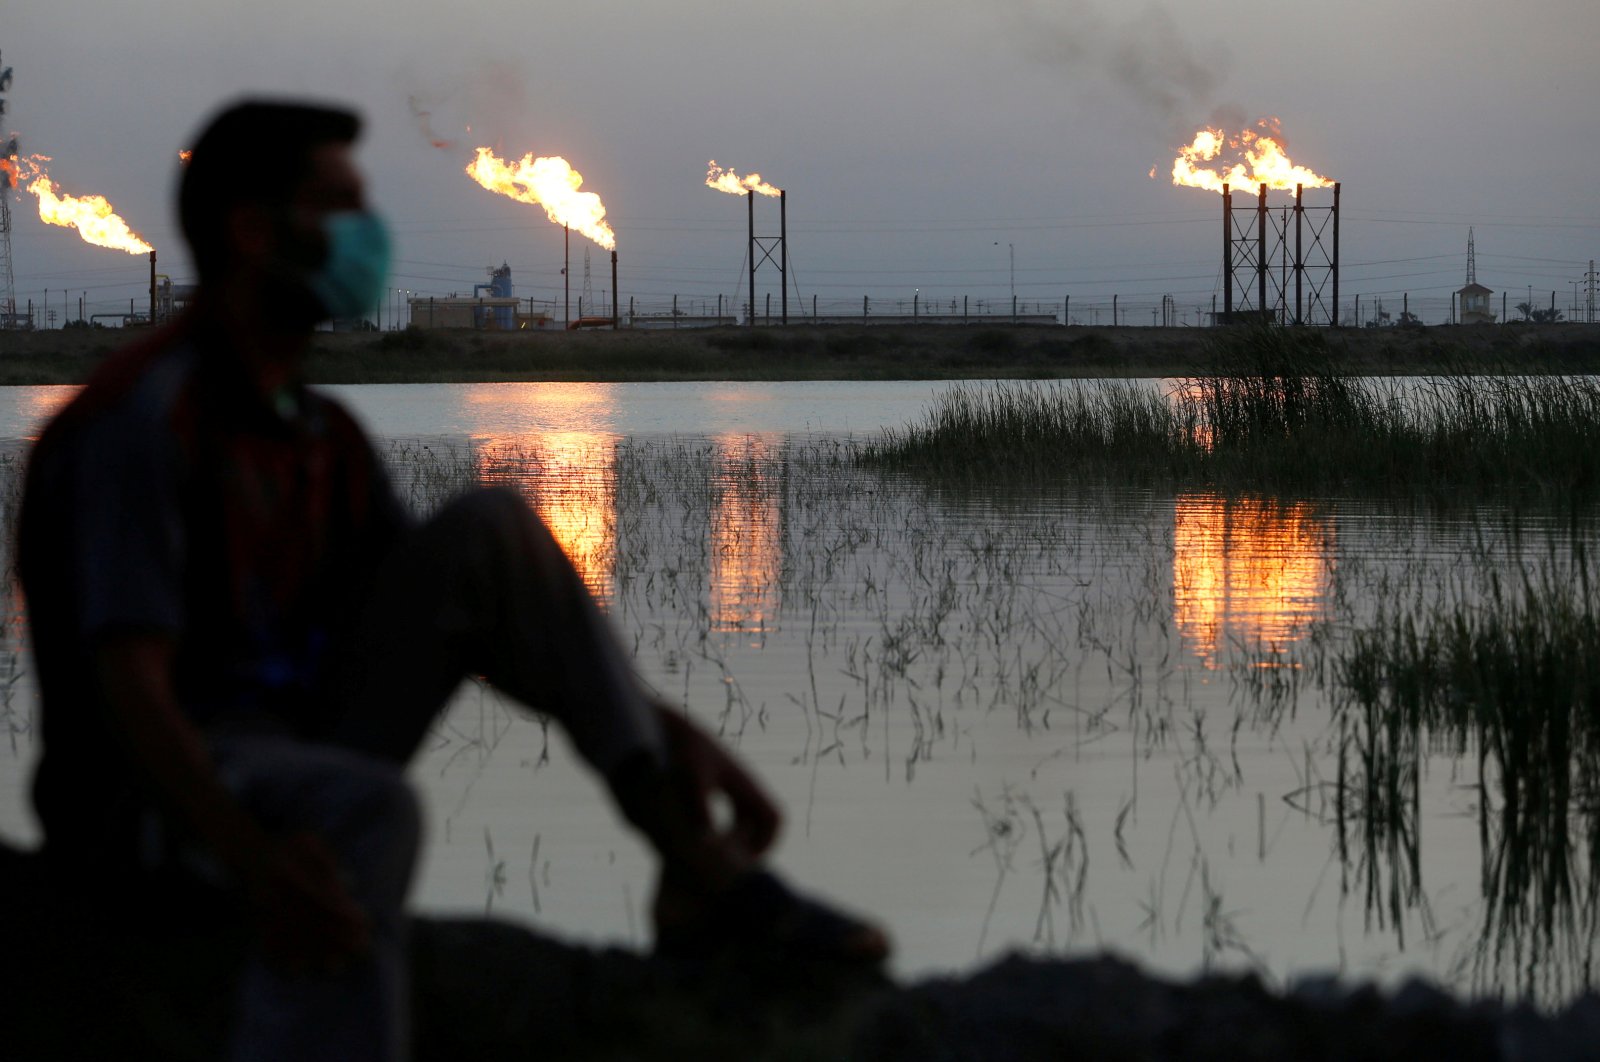 Flames emerge from flare stacks at Nahr bin Umar oil field, as a man is seen wearing a protective face mask, following the outbreak of the coronavirus, north of Basra, Iraq, March 9, 2020. (Reuters Photo)